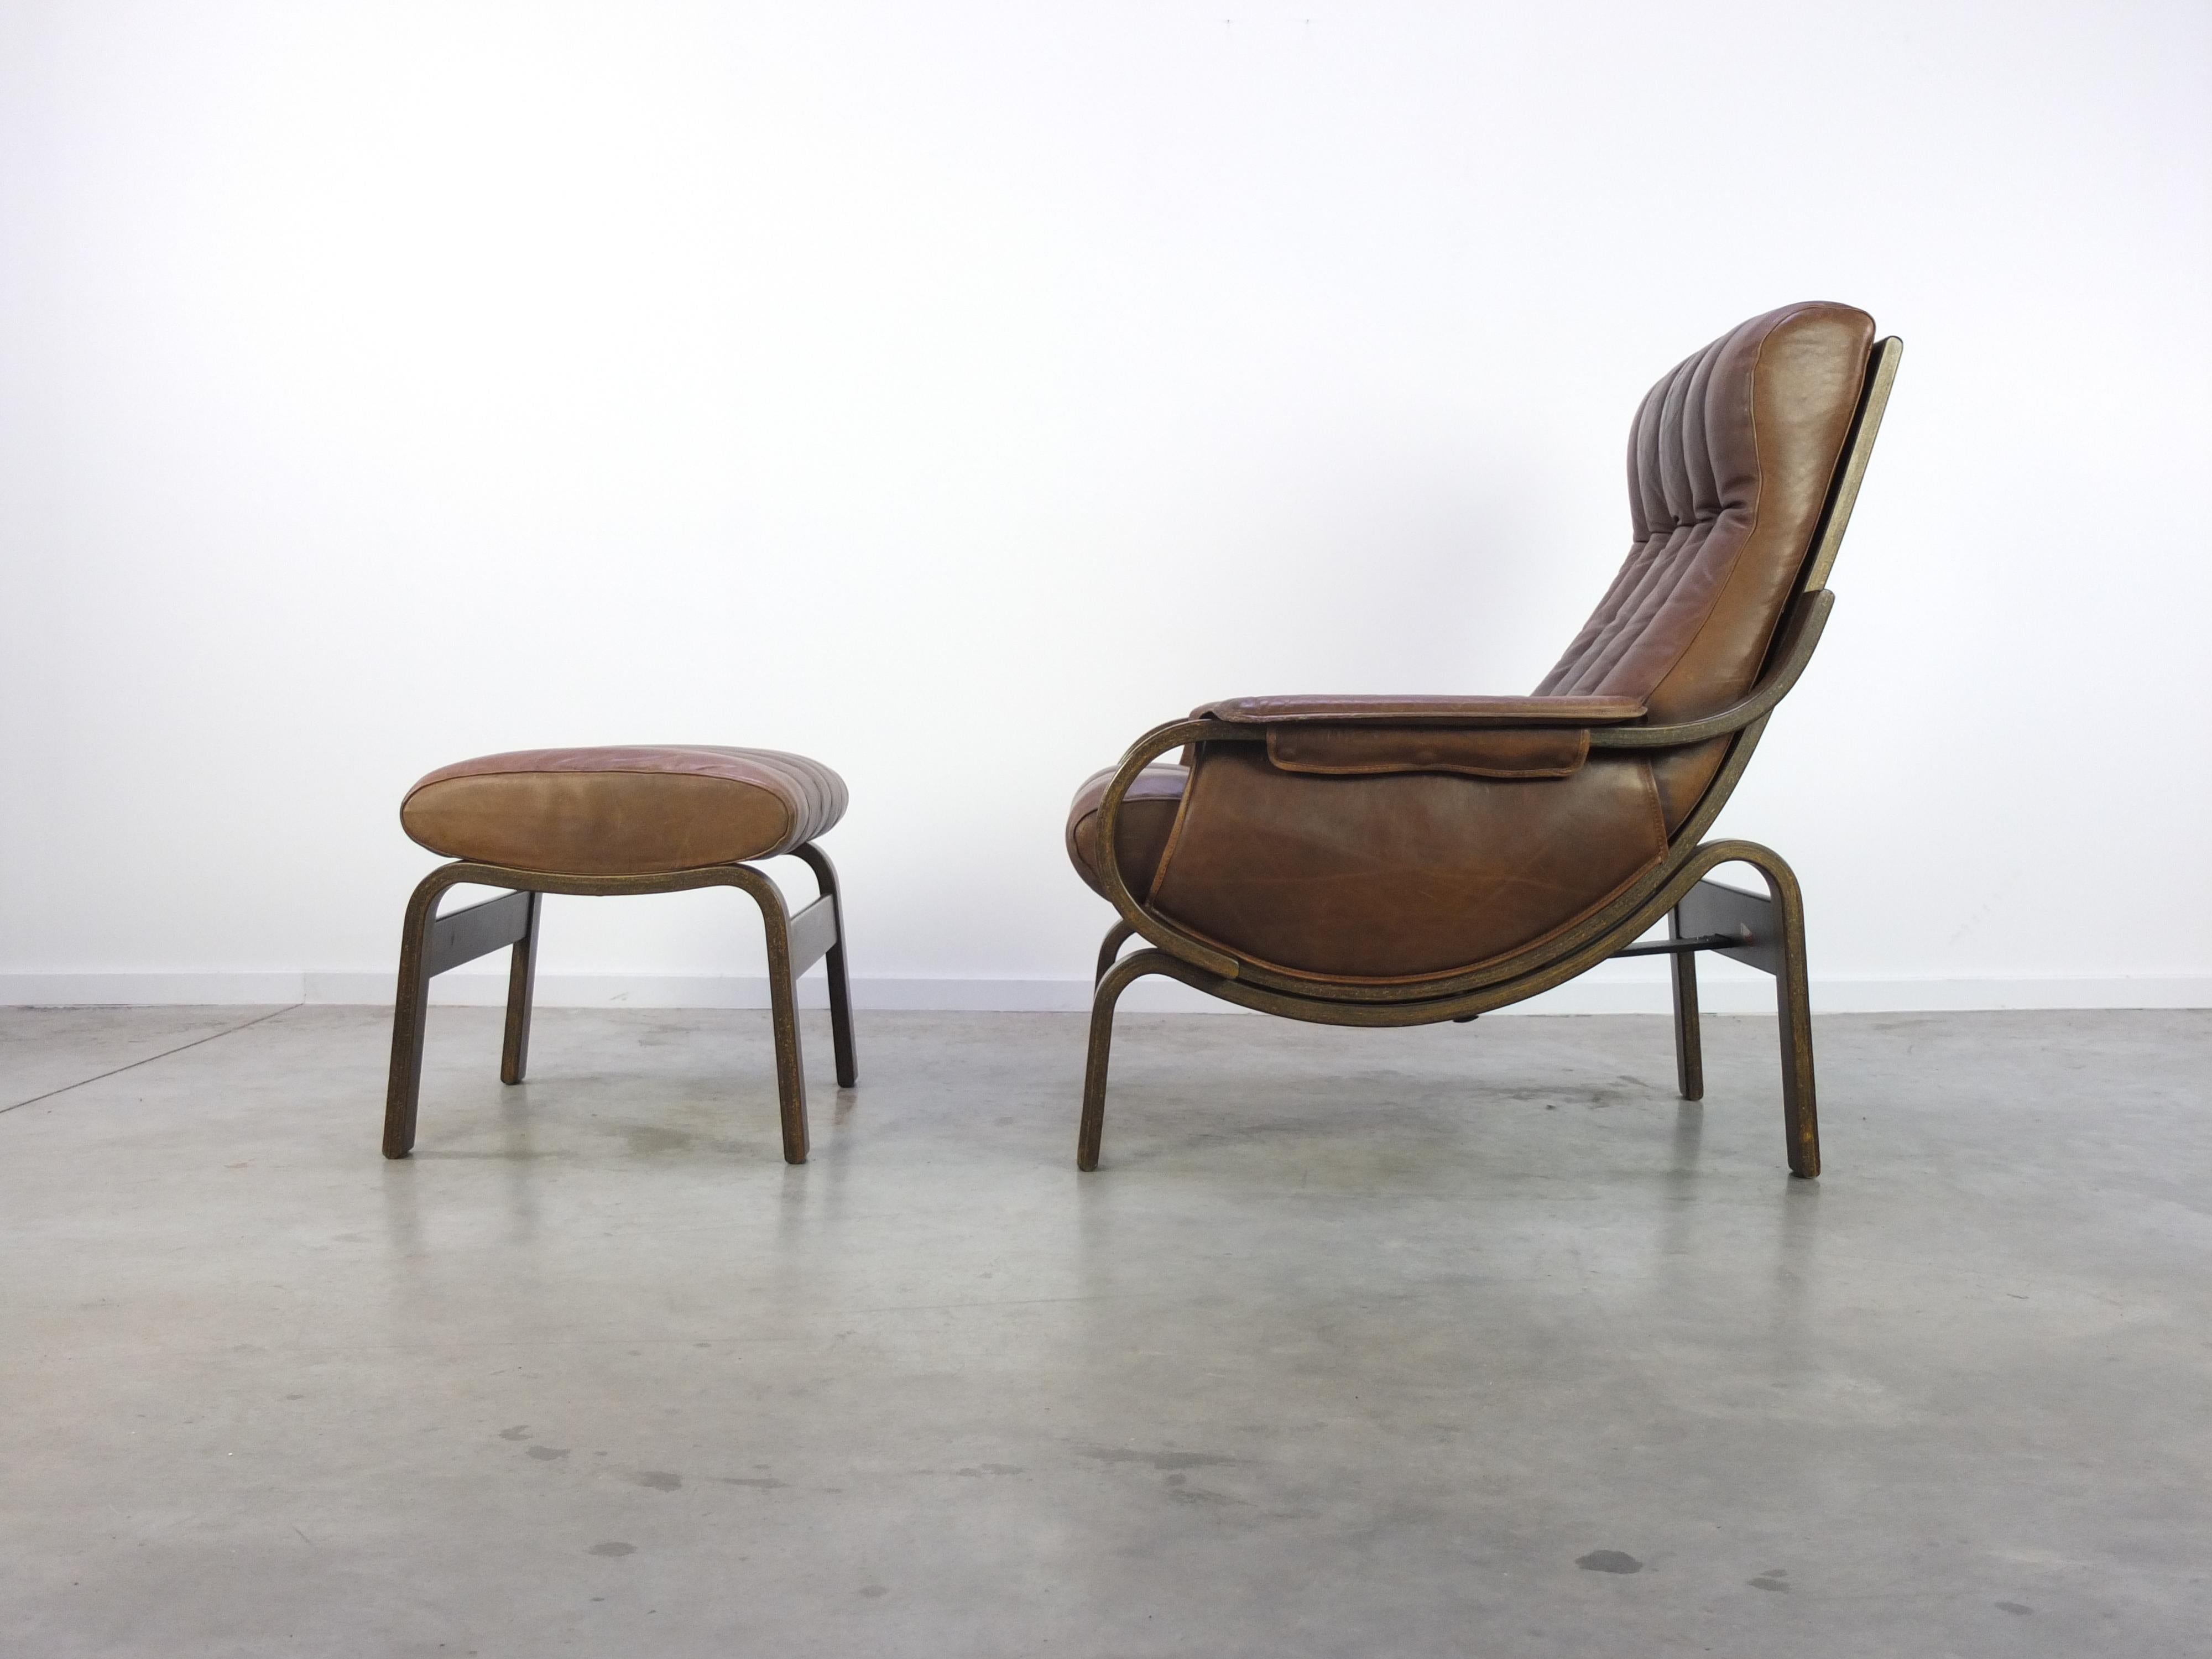 Original ‘Orbit’ lounge chair designed by Ingmar Relling during the 1960s. This example has beautiful soft brown leather with a lovely patina and comes with it rare and original matching ottoman. The chair has two seating positions as seen on the